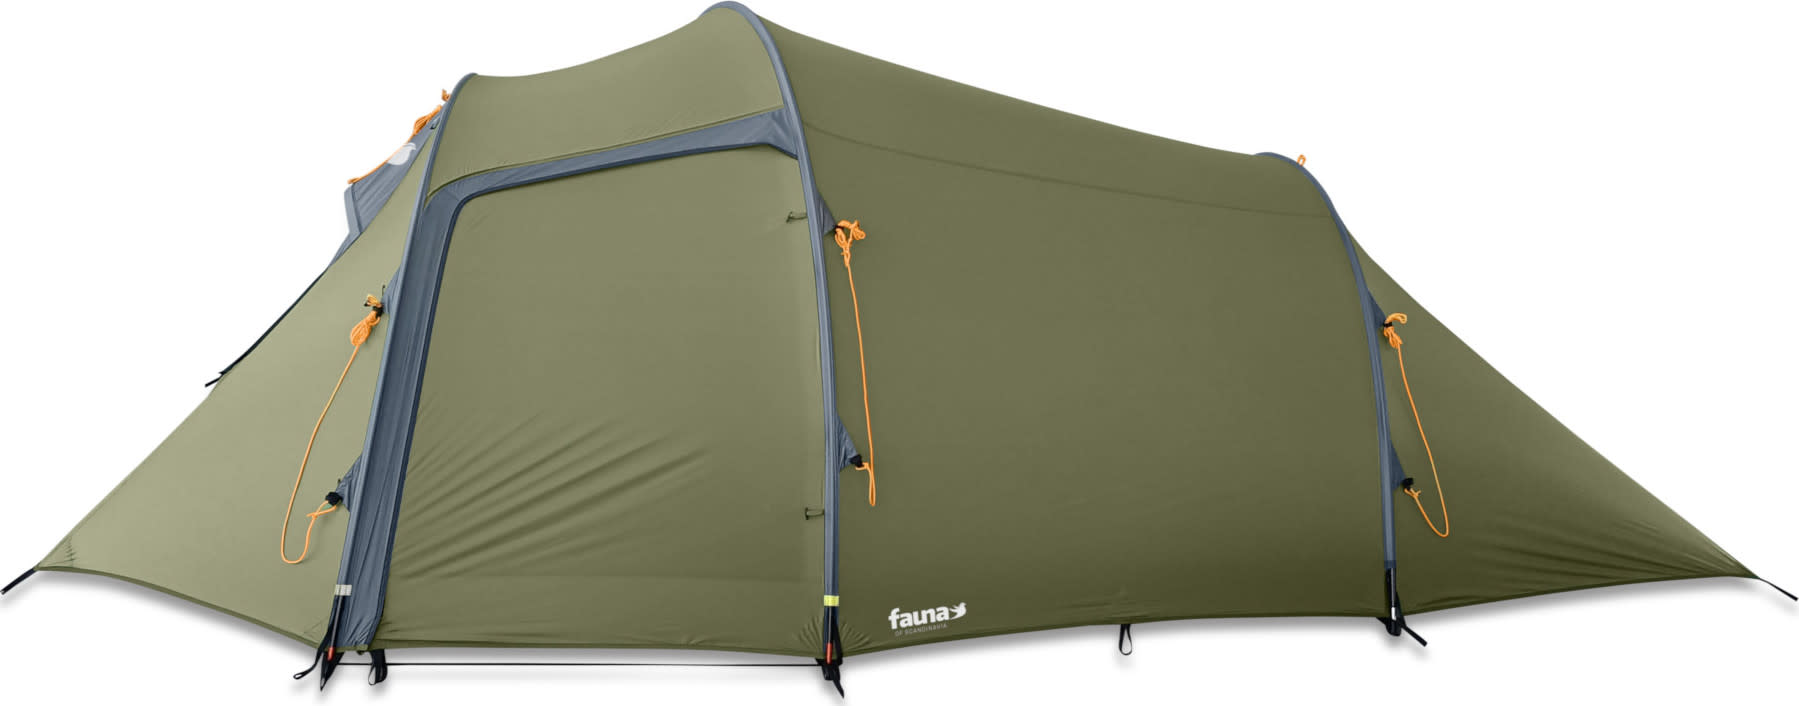 Fauna Outdoor Nordic 3 Persons Green